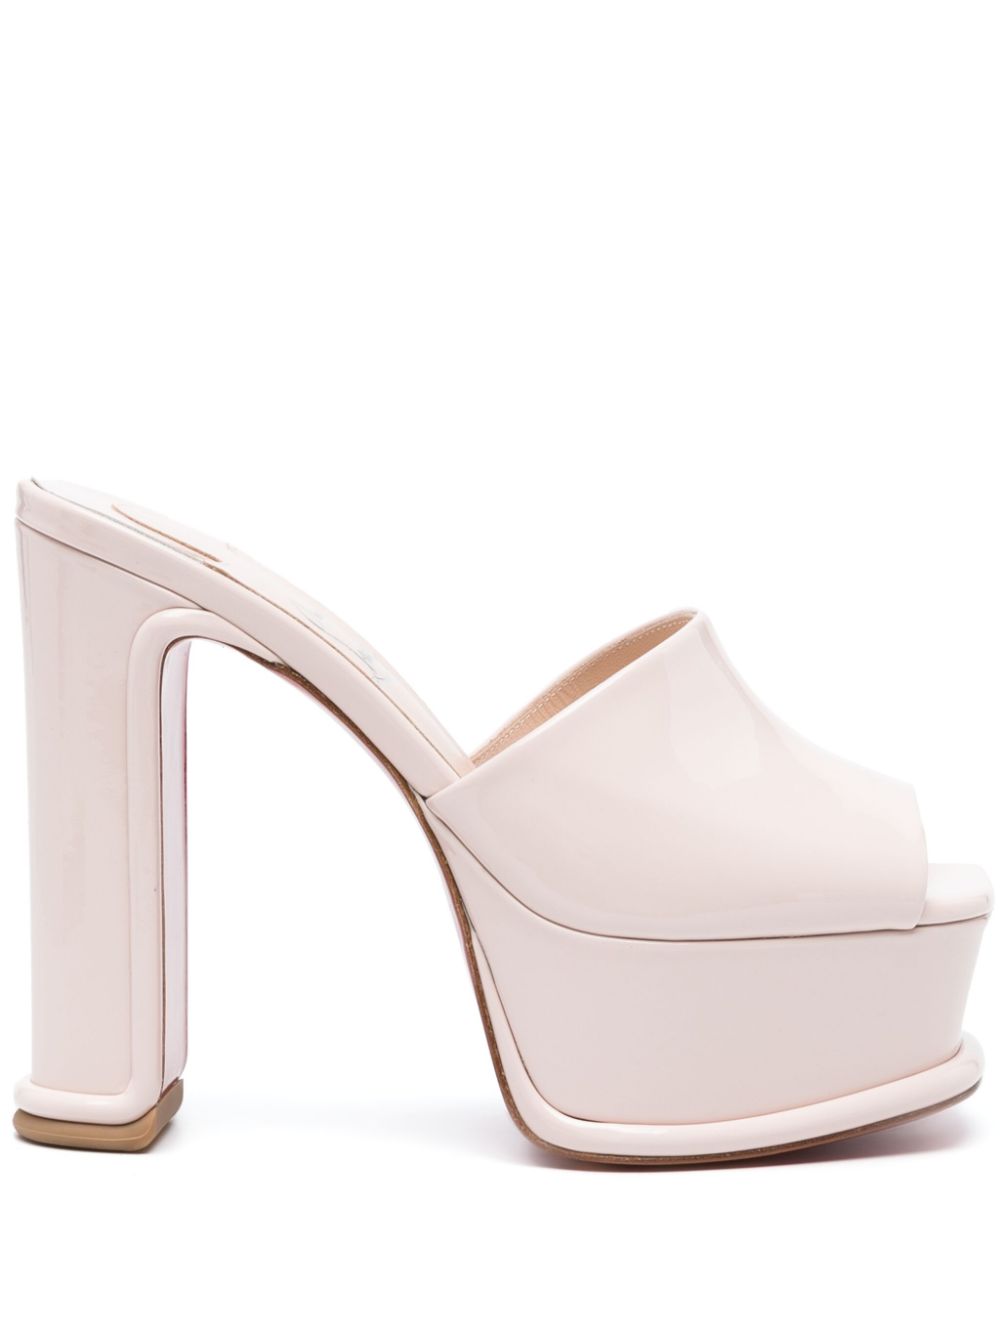 CHRISTIAN LOUBOUTIN Powder Pink Open Toe Sandals with High Block Heel and Platform Sole